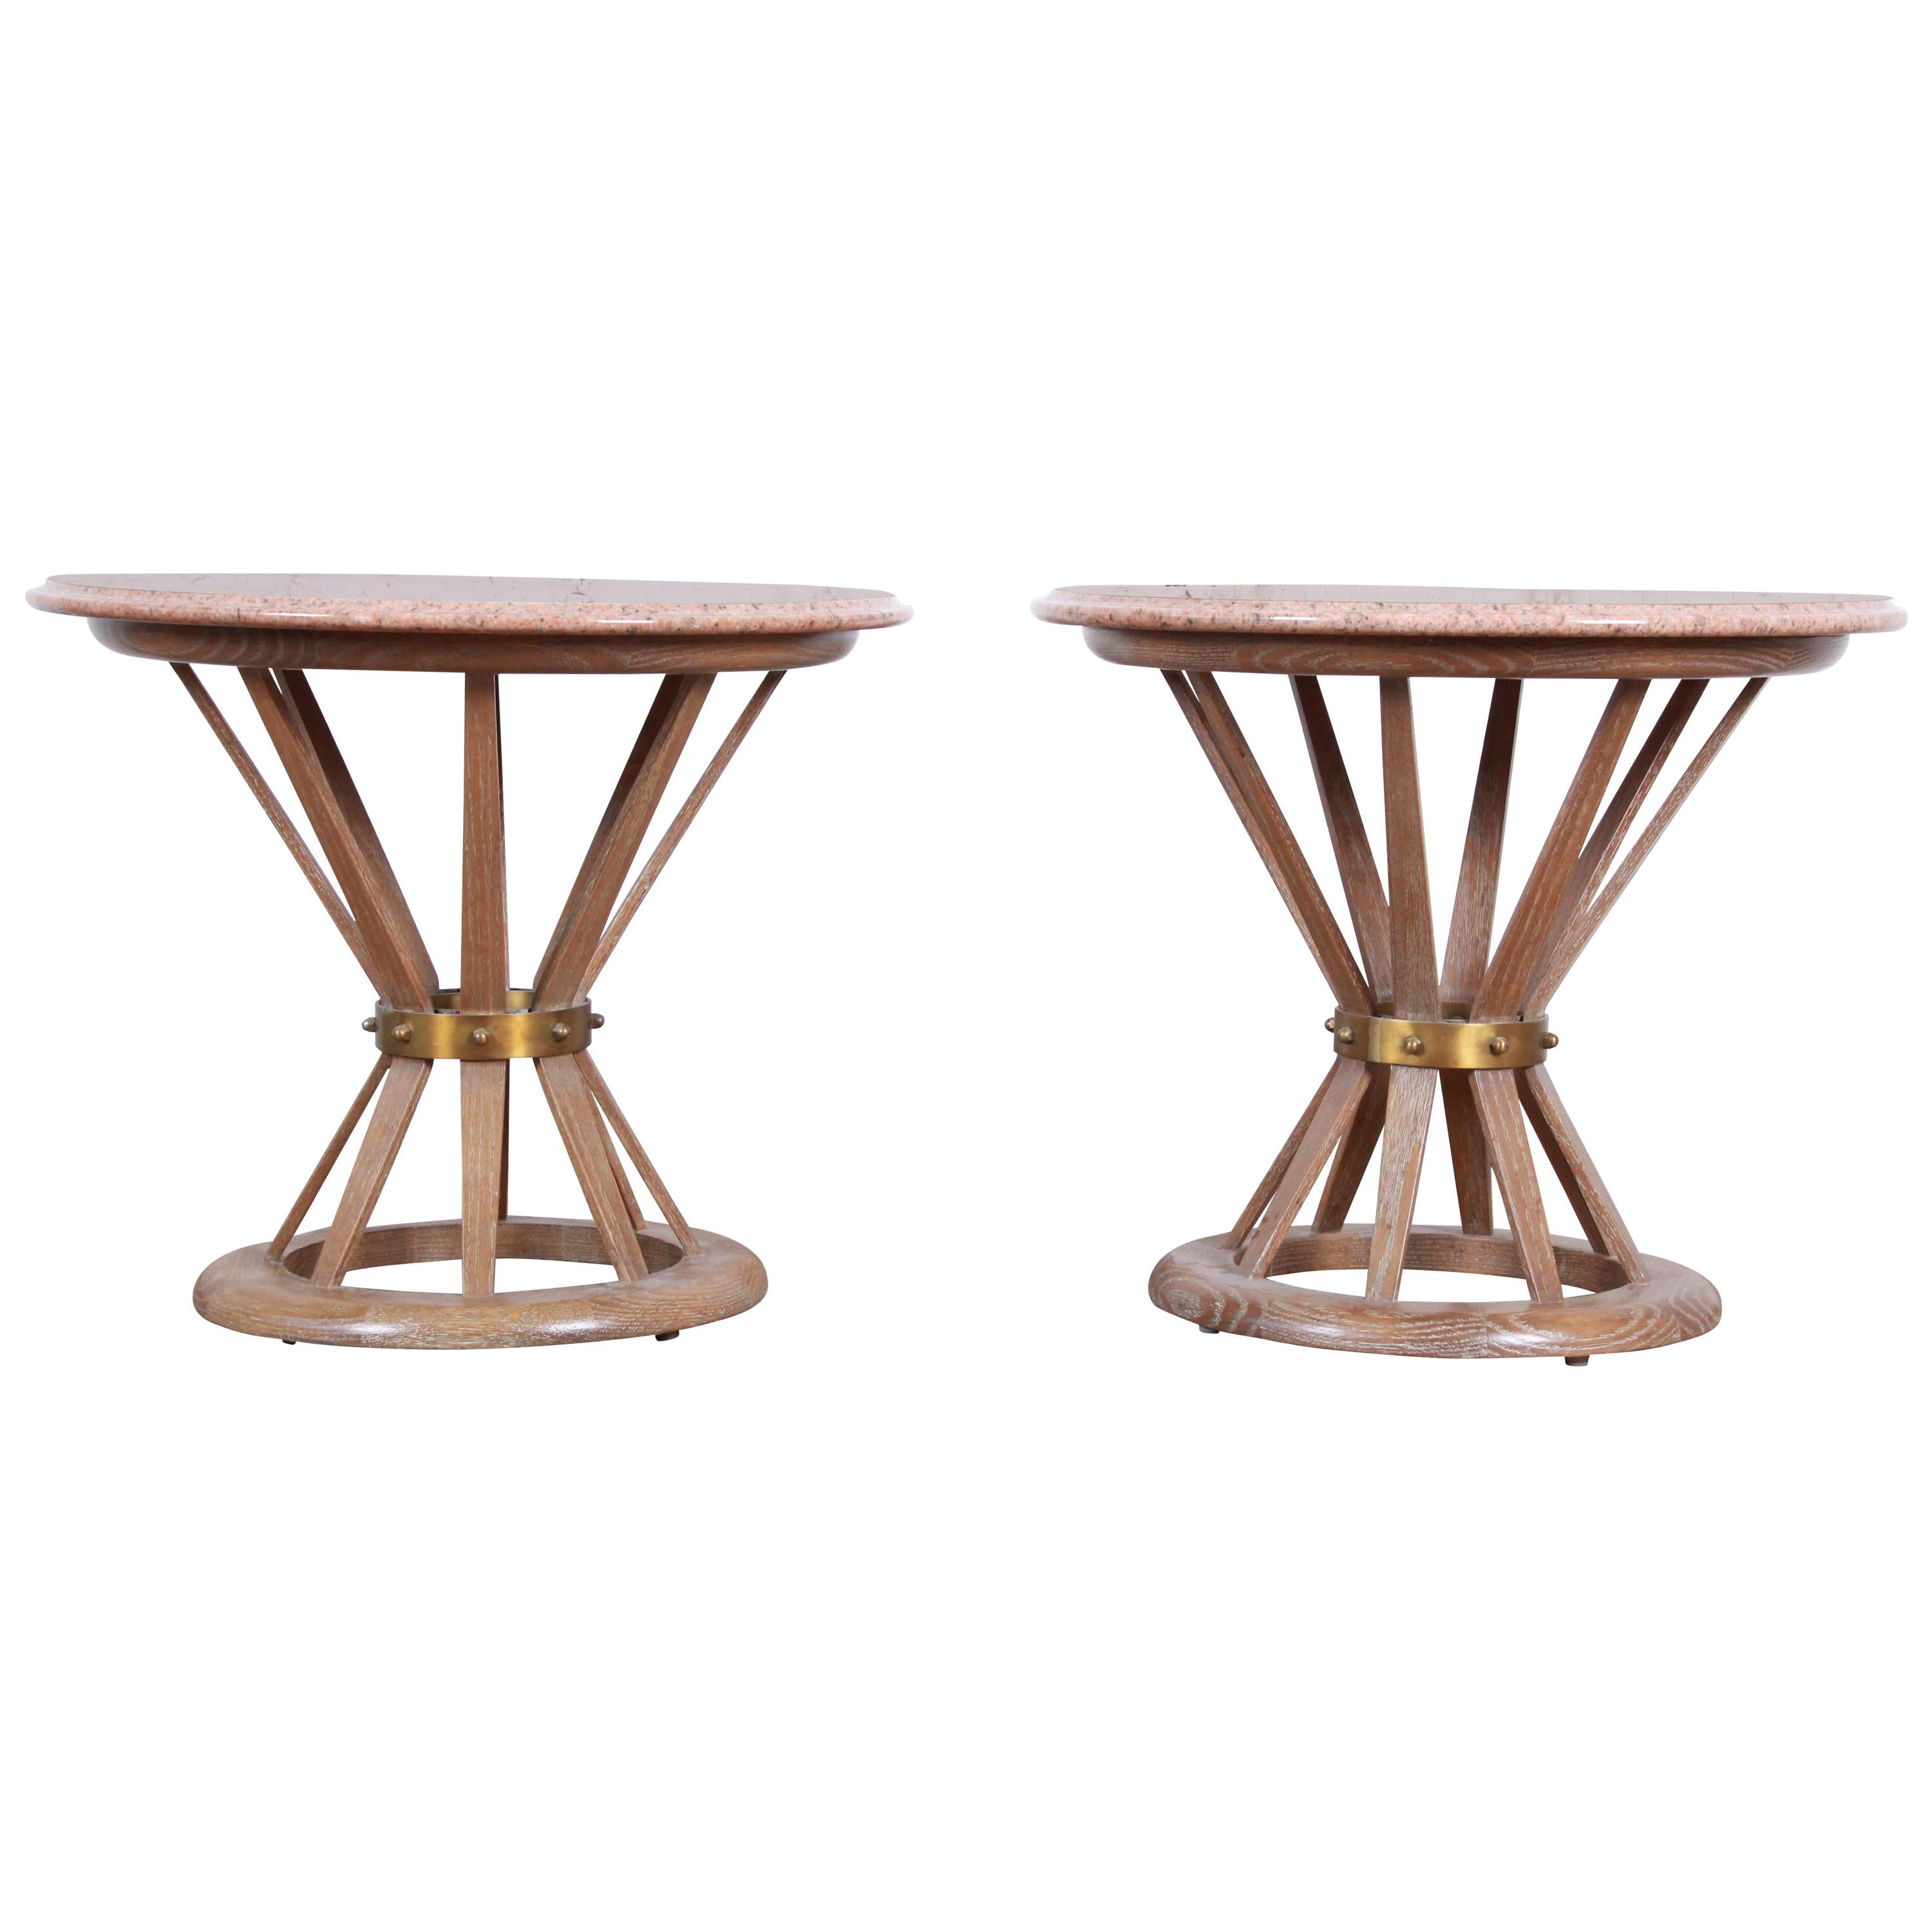 Edward Wormey for Dunbar Style Sheaf of Wheat Marble Top Side Tables, Pair